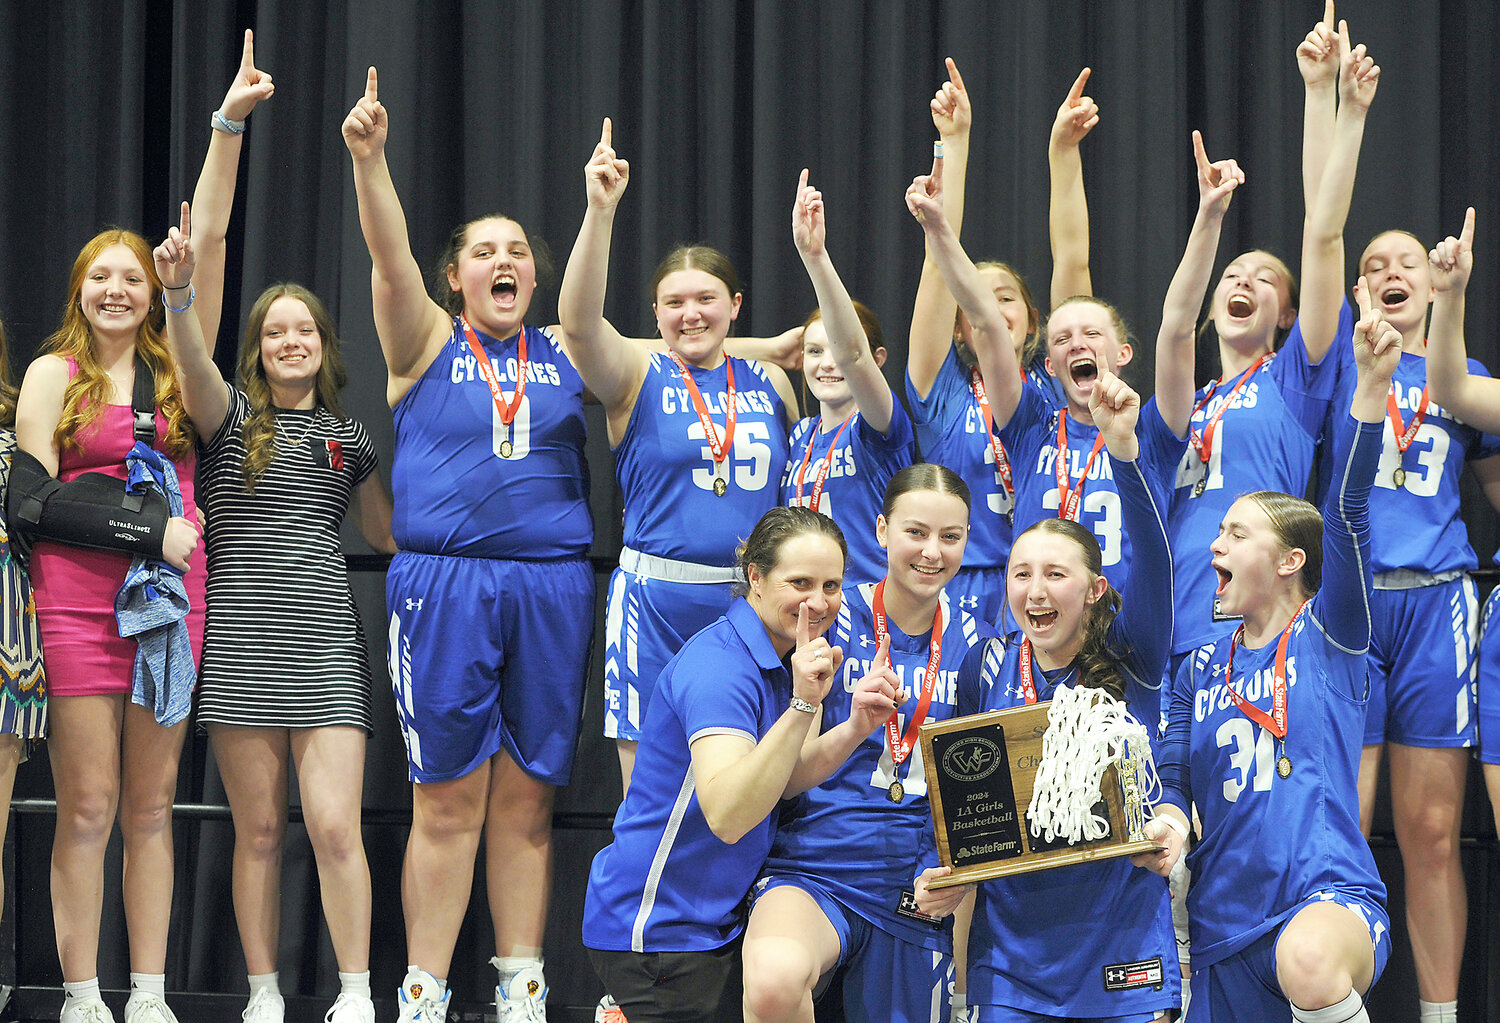 Your 2024 1A Wyoming State Basketball Champions – the Southeast High School Lady Cyclones! Pictured, in front, from left, are Coach Jennifer Scheer, Kylee Llewellyn, Baylie Booth and Sasha Haines. In back, from left, are Brylie Booth, Taylor Tregemba, Haylee Ekwall, Brea Mills, Macy Tremain, Anna Hartman, Kaycee Kosmicki, Hadley Leithead, Brooklyn Leithead and Rein Carlson. More on B1